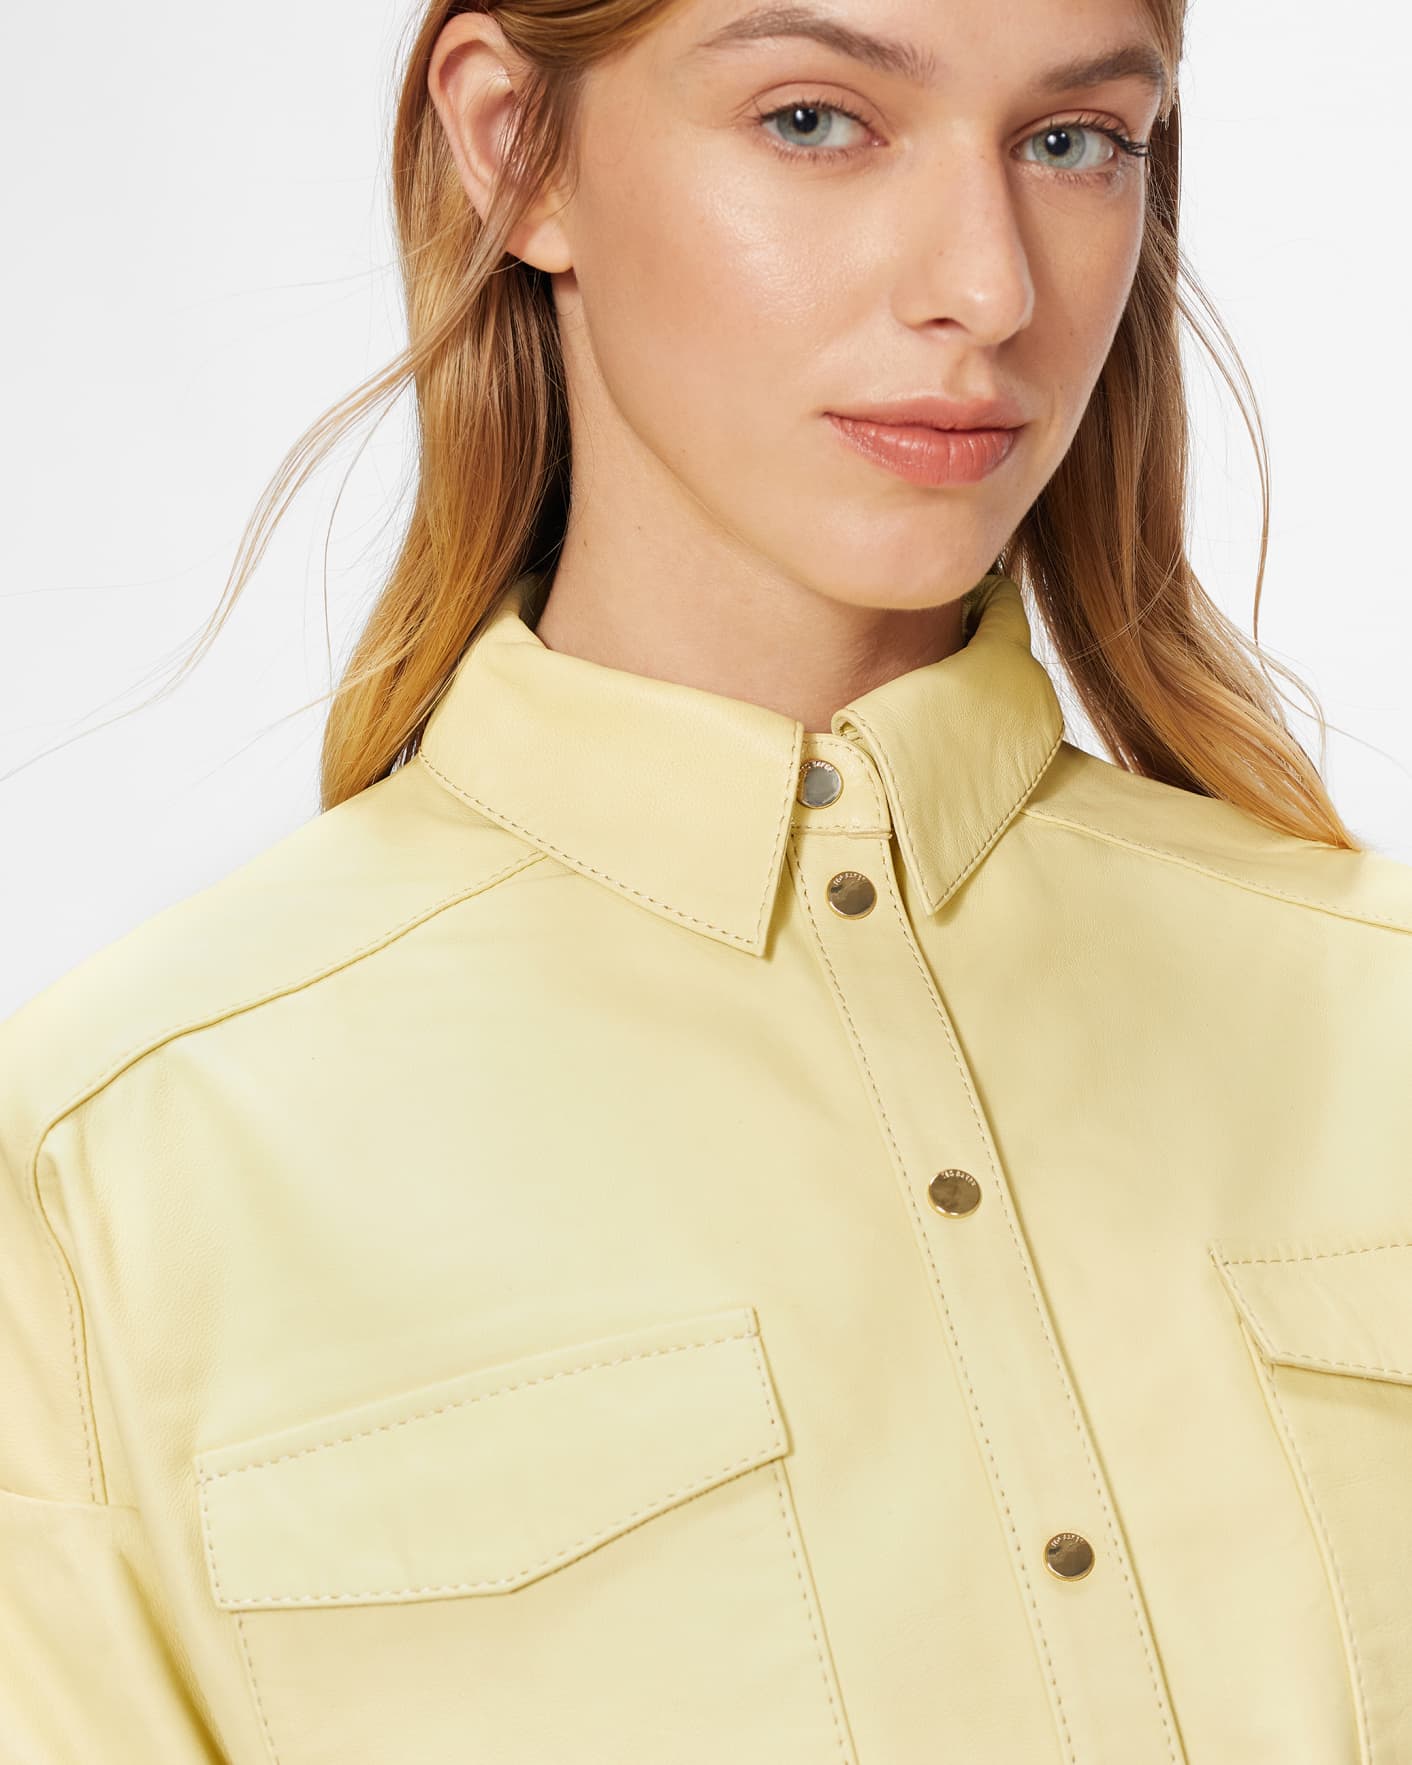 LAARS - LT-YELLOW | Tops & T-Shirts | Ted Baker US